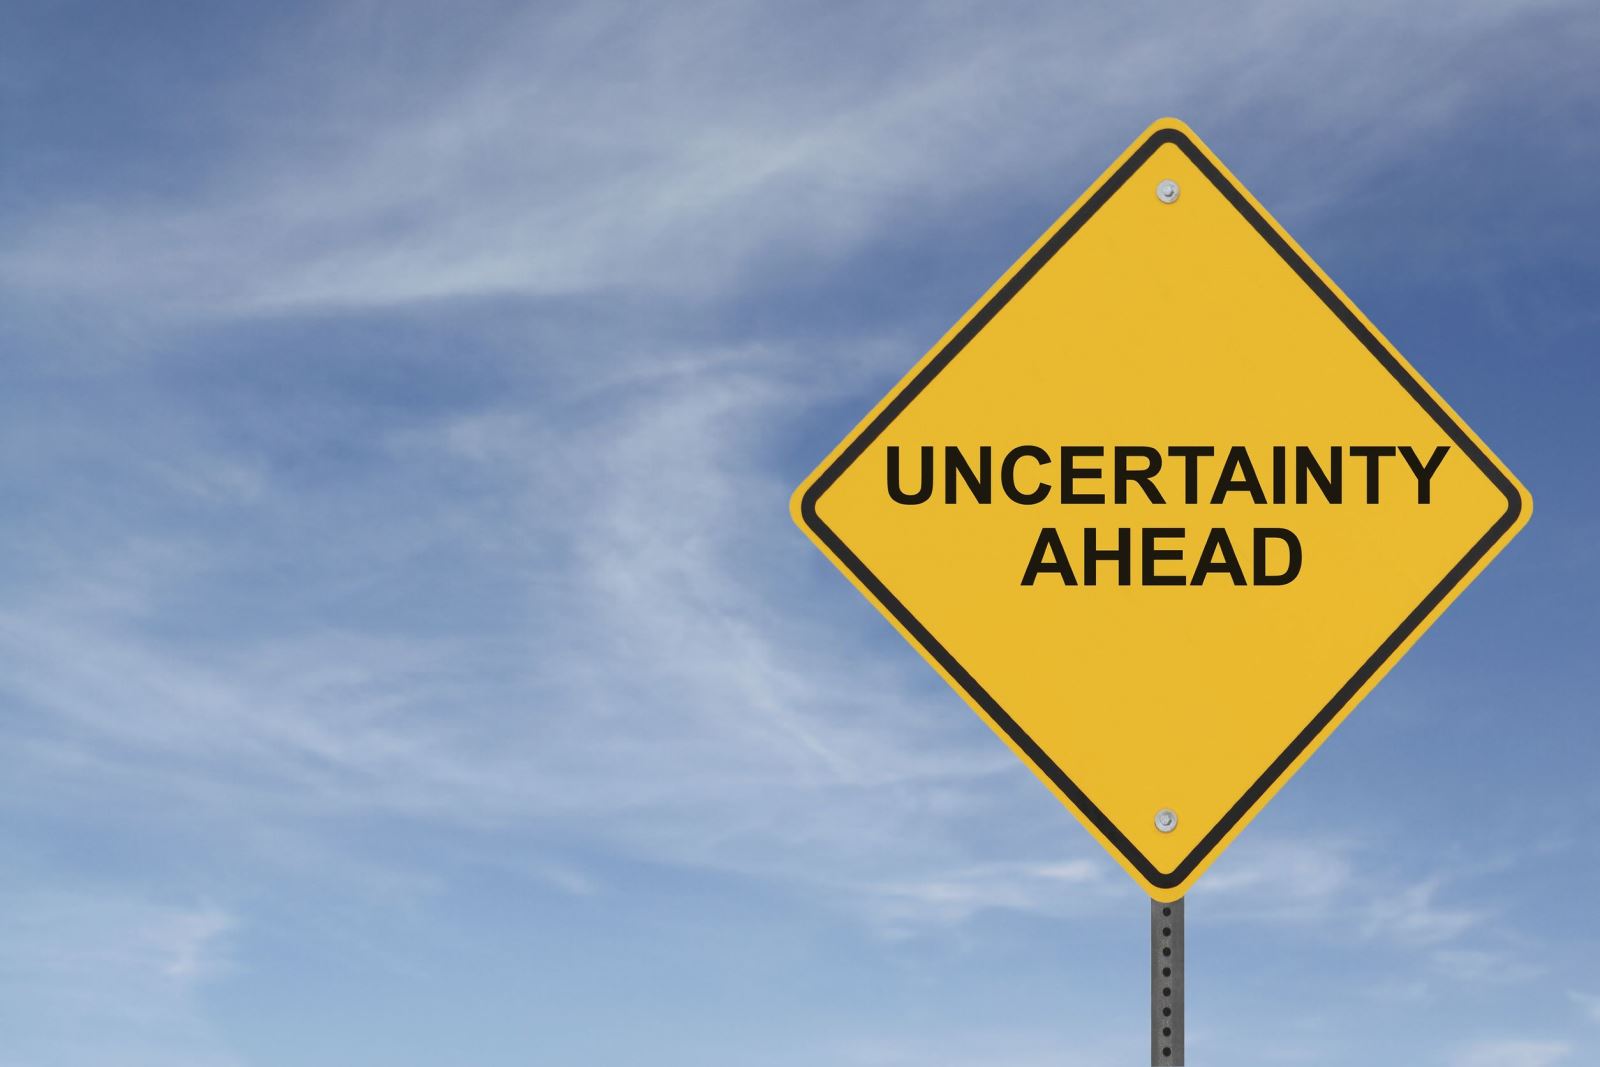 What HR should do during times of uncertainty